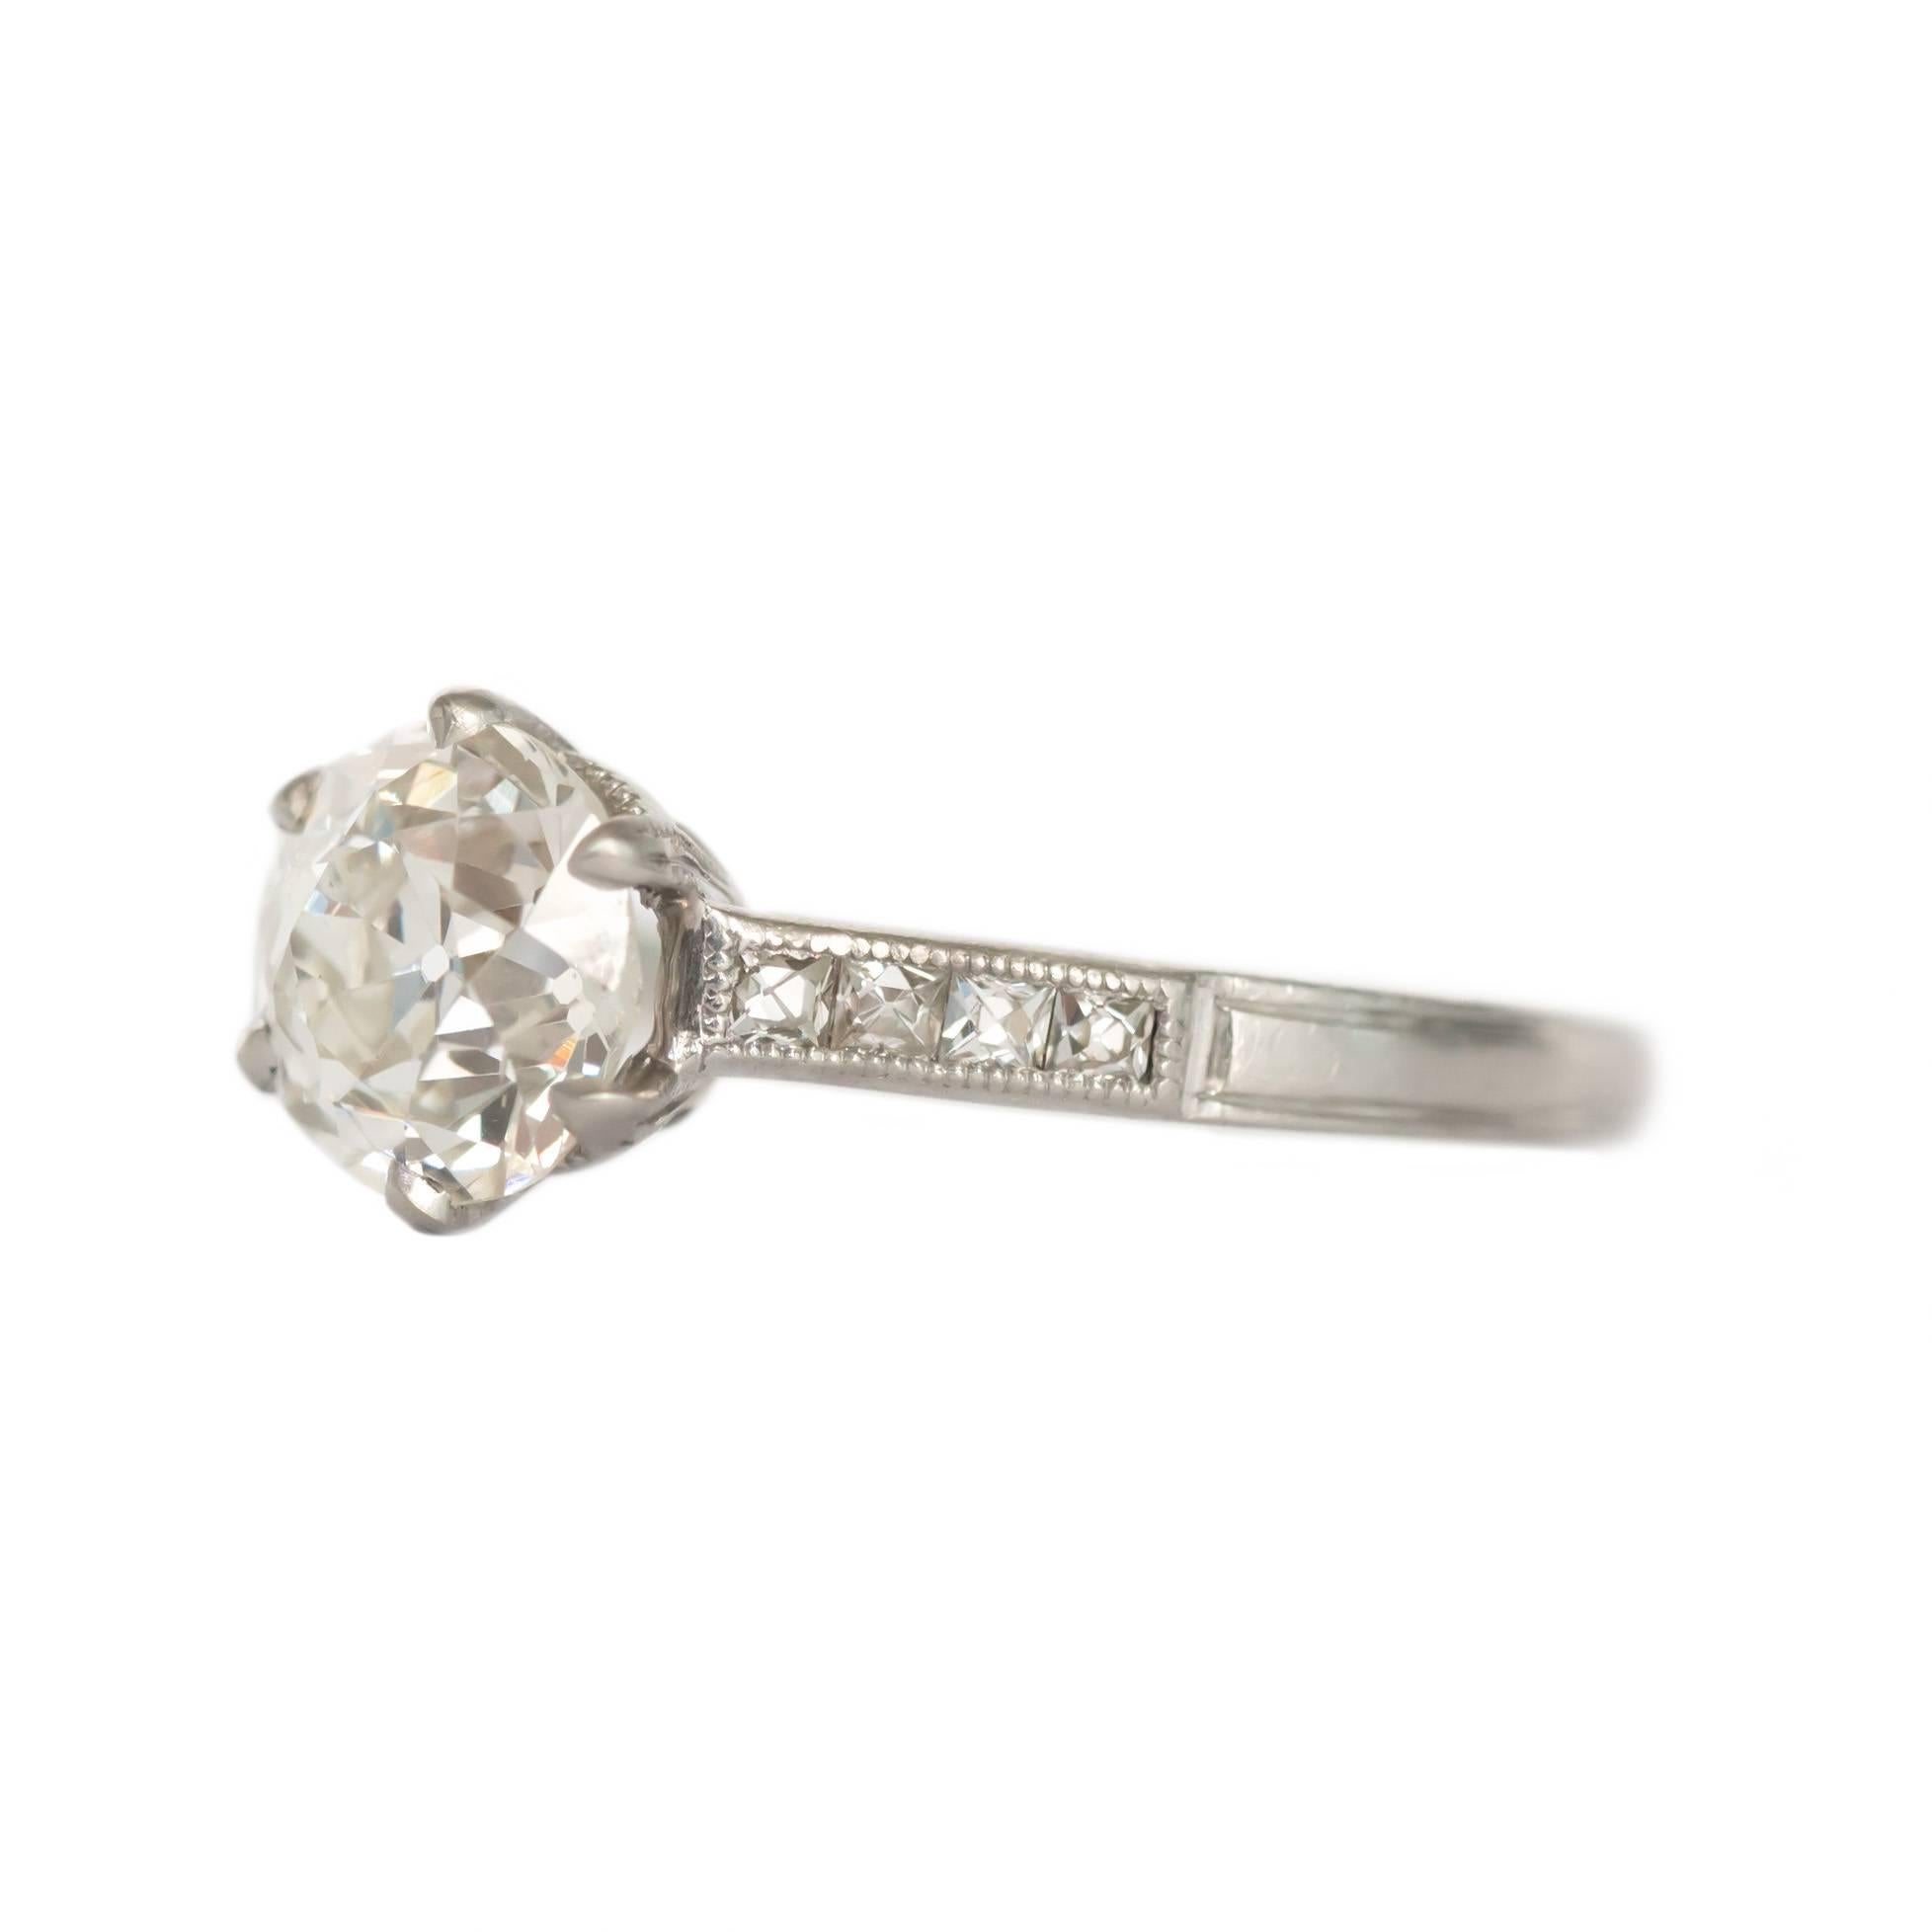 Item Details: 
Ring Size: 6.5
Metal Type: Platinum 
Weight: 3.6 grams

Center Diamond Details
GIA CERTIFIED Center Diamond - Certificate # 1196266432 
Shape: Old European Cut 
Carat Weight: 1.20 Carat
Color: J
Clarity: SI2

Side Stone Details: